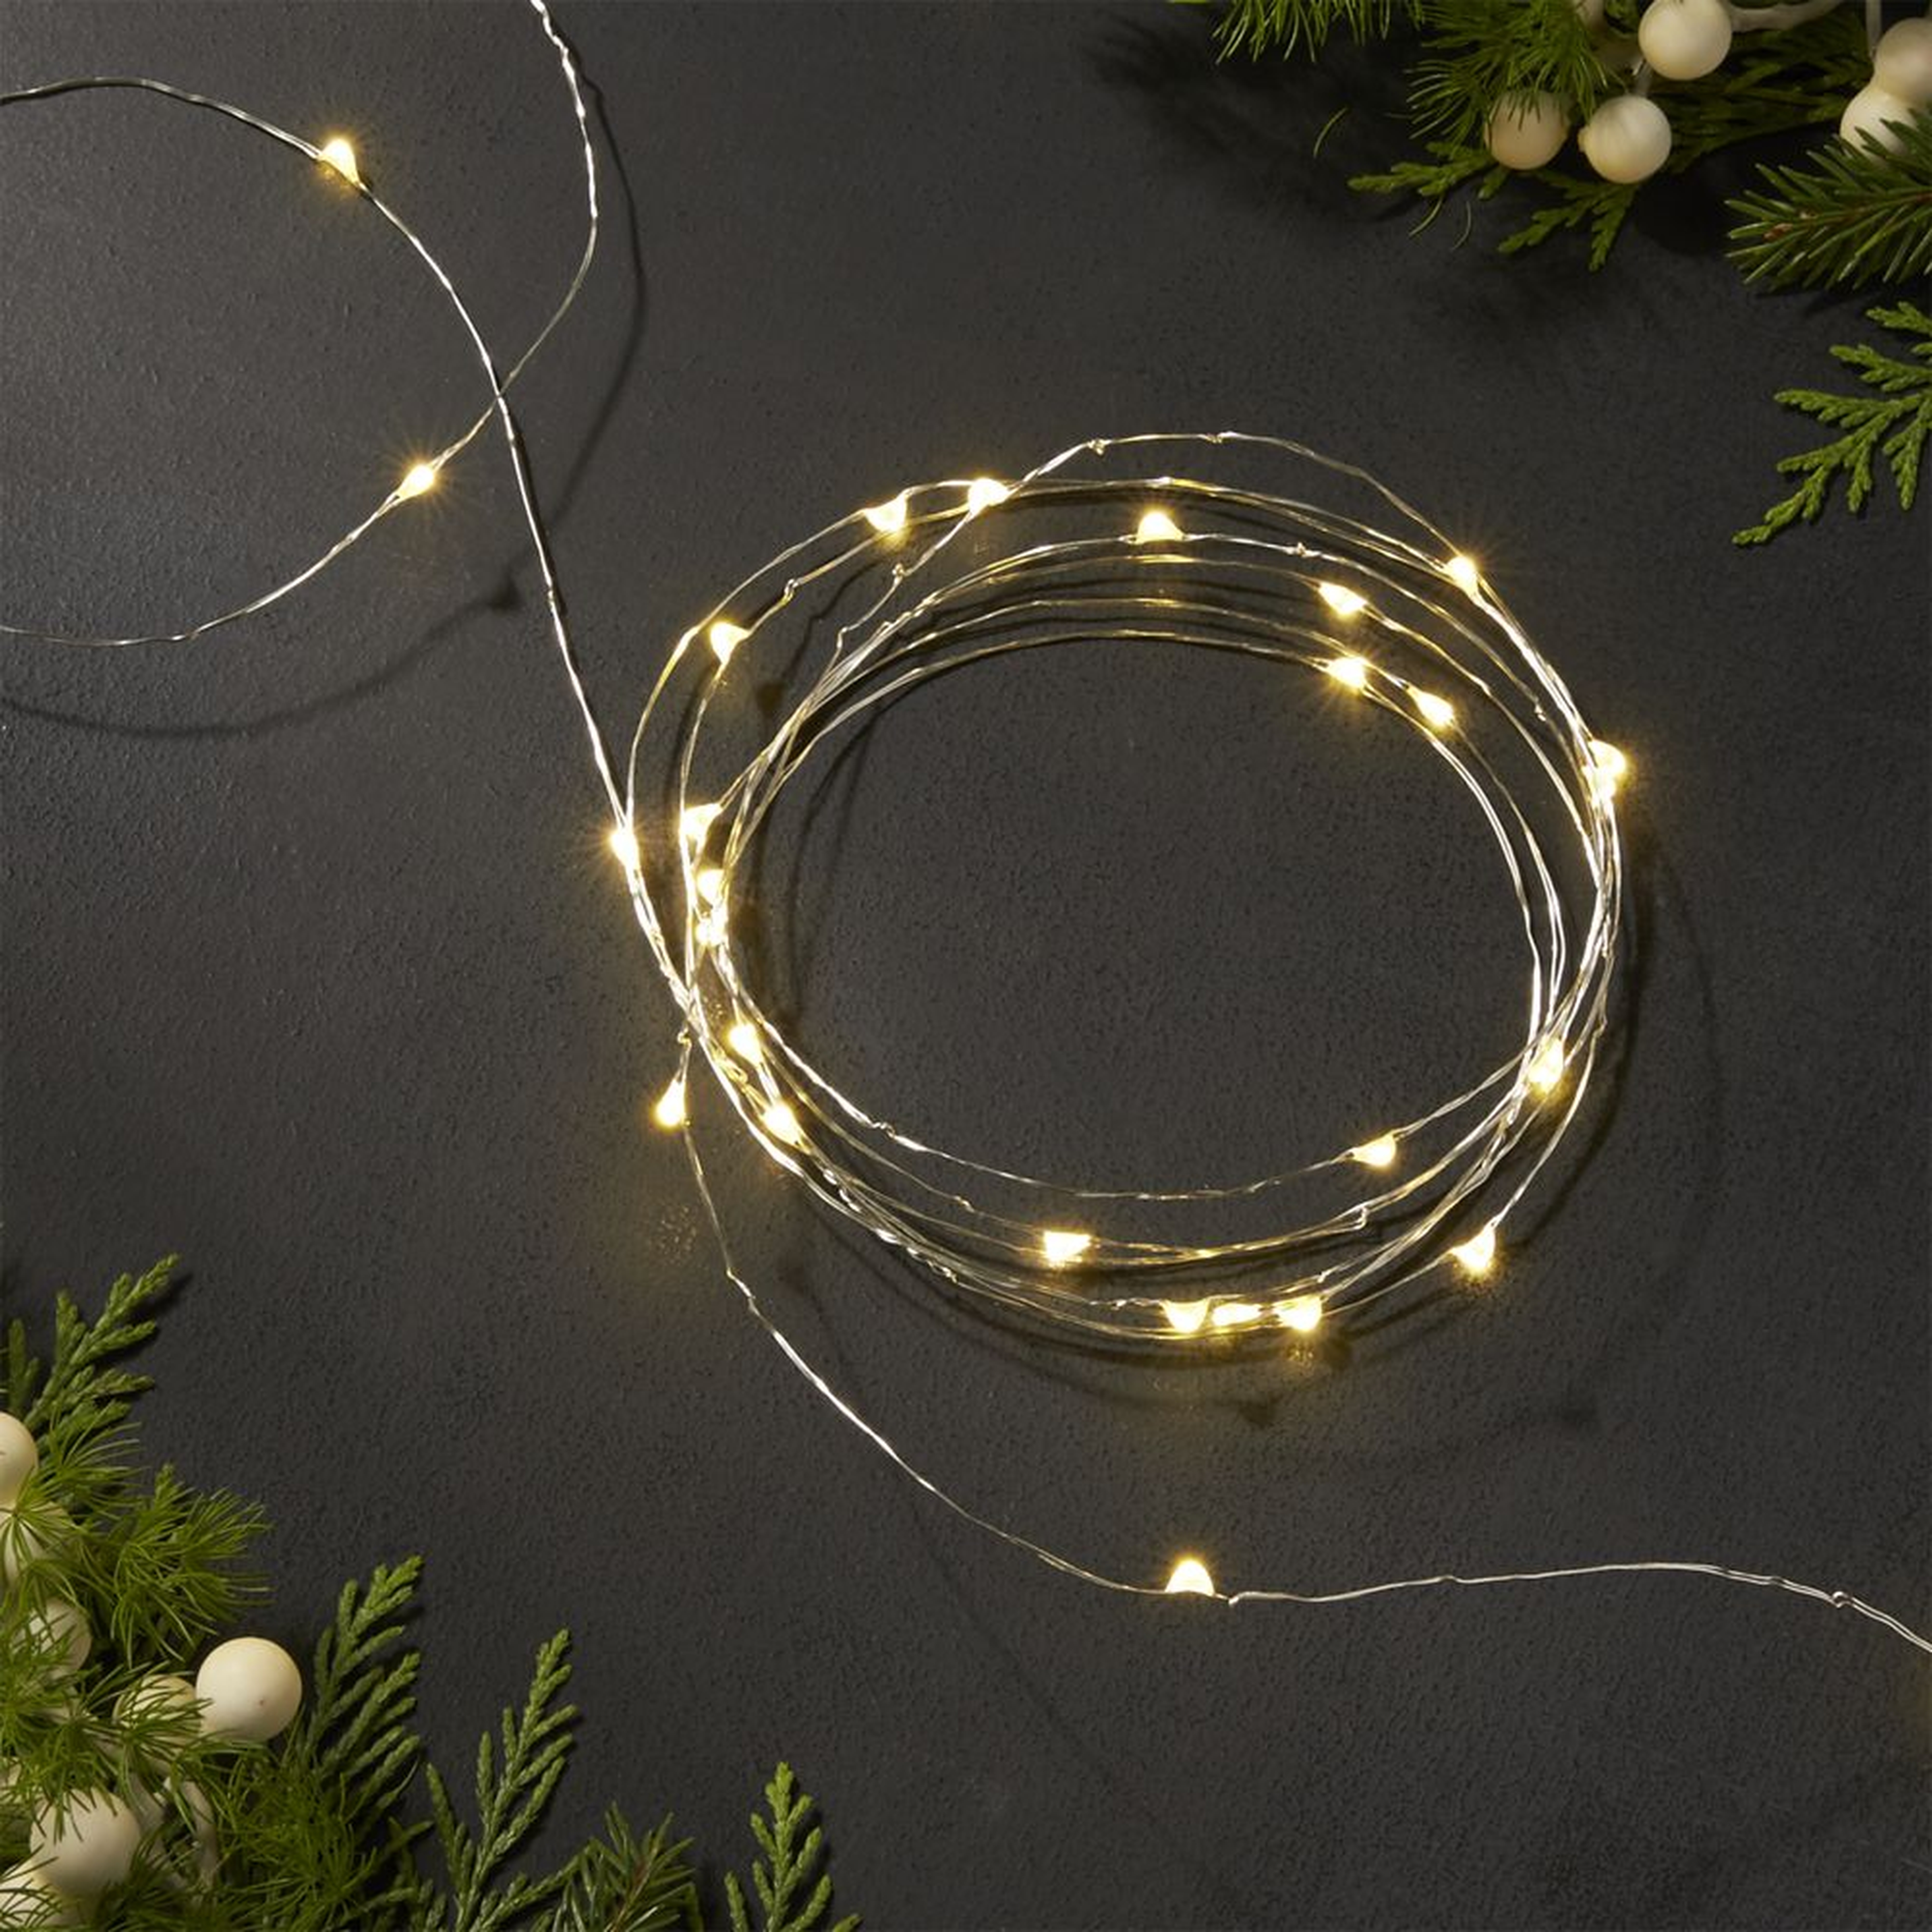 Twinkle Silver 30' Outdoor String Lights - Crate and Barrel